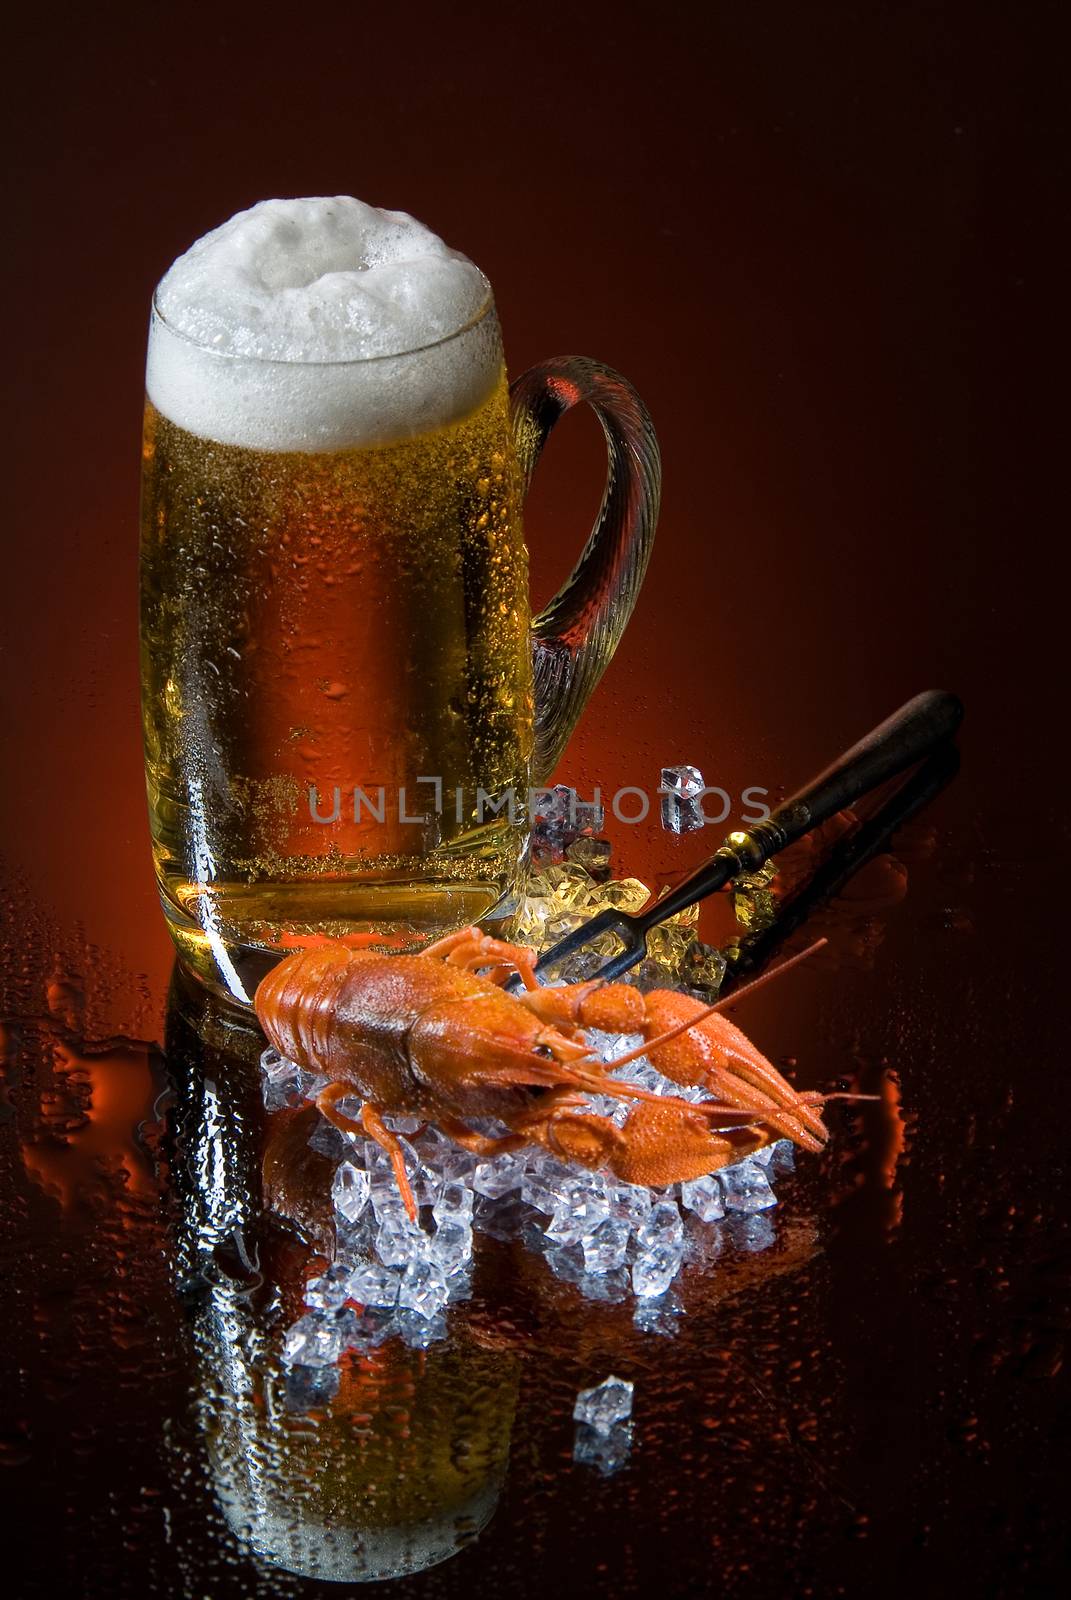 Glass of bier and crawfish on a glass background